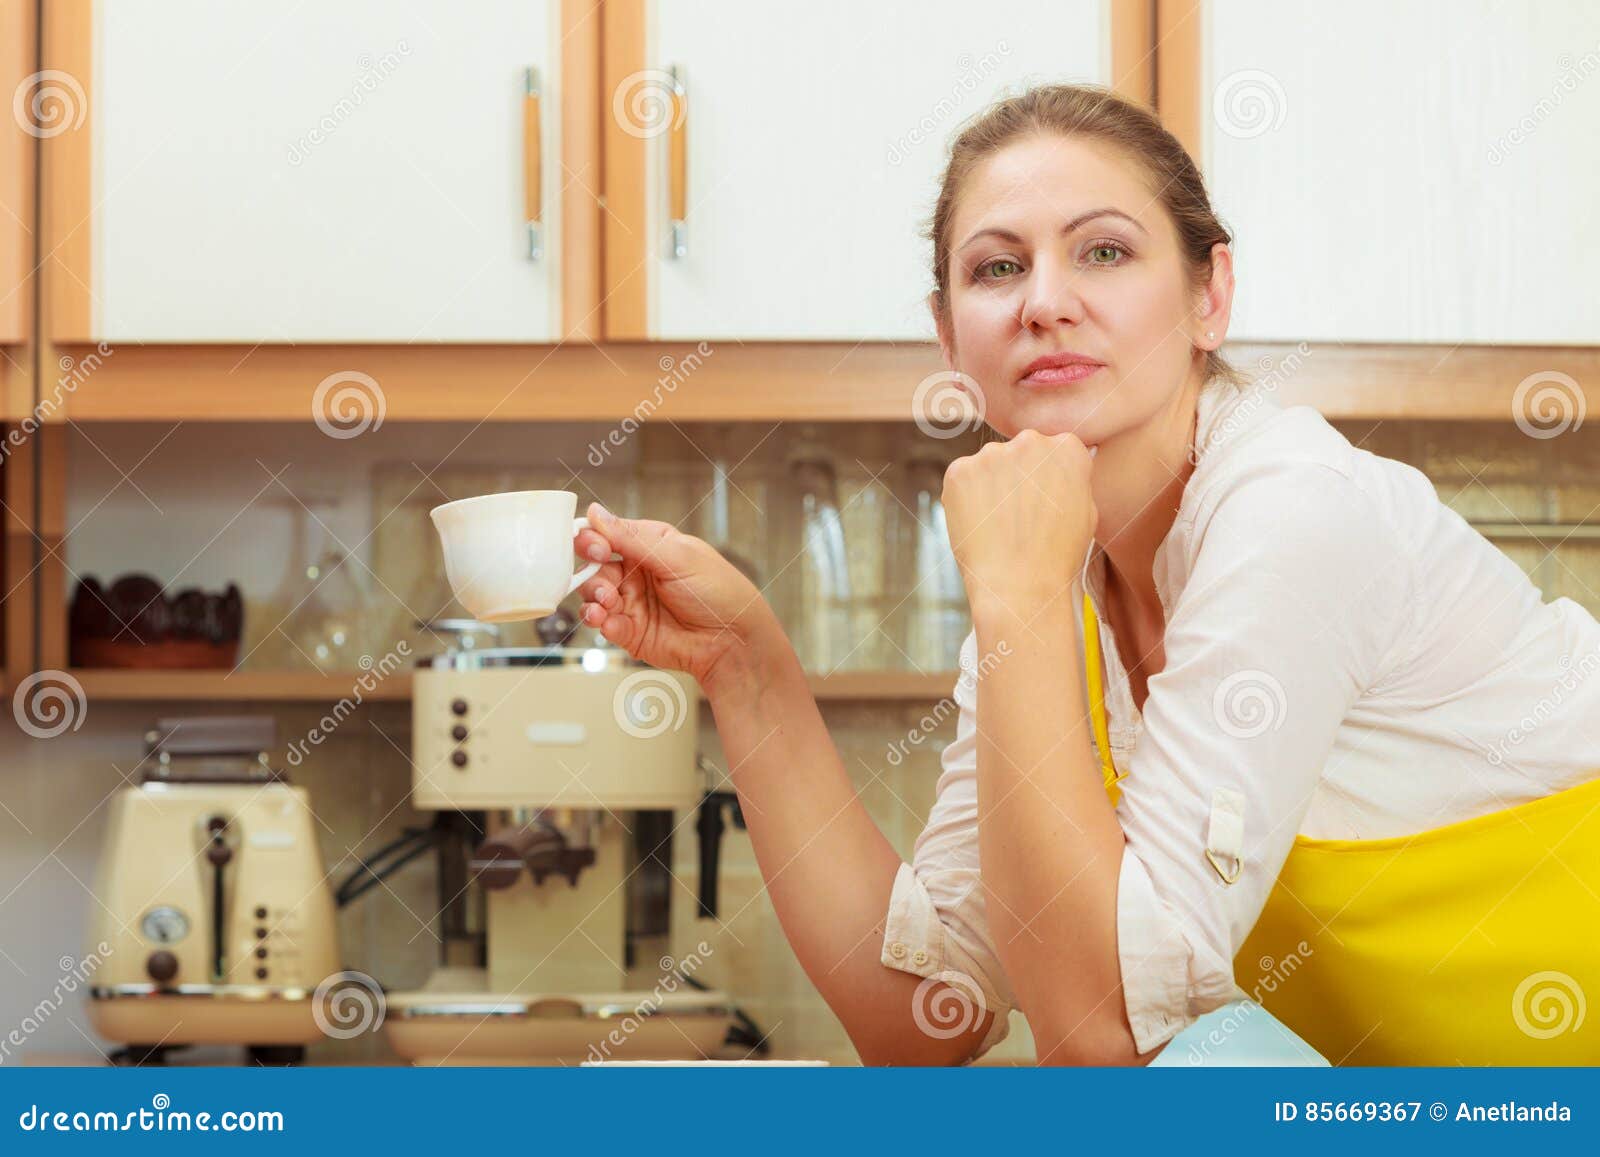 Mature Woman Holding Cup Of Coffee In Kitchen Stock Image I